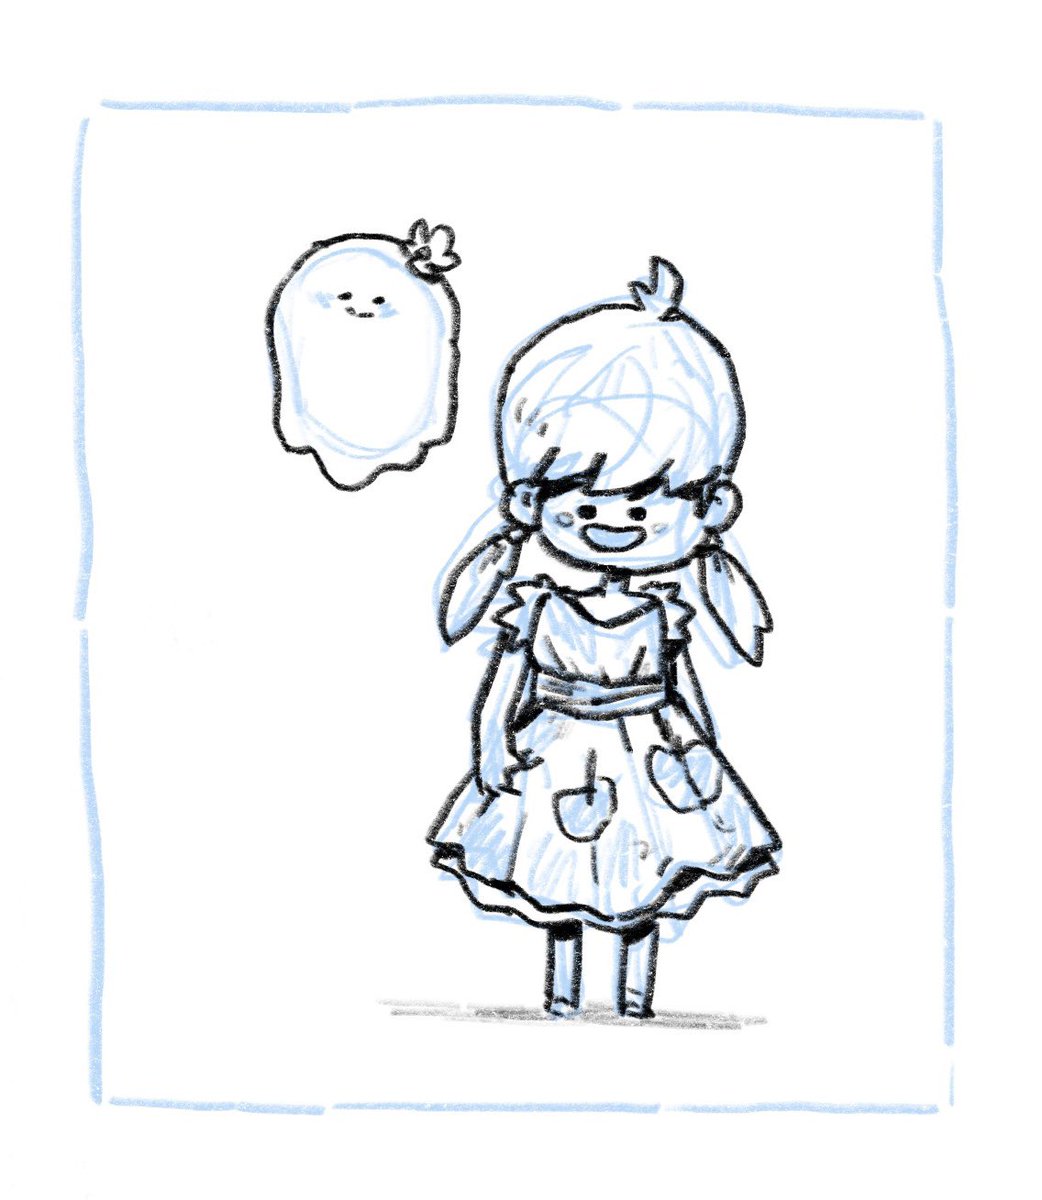 Late night sketching, thinking about the show City of Ghosts :) Would be nice to have pleasant ghost friends! 